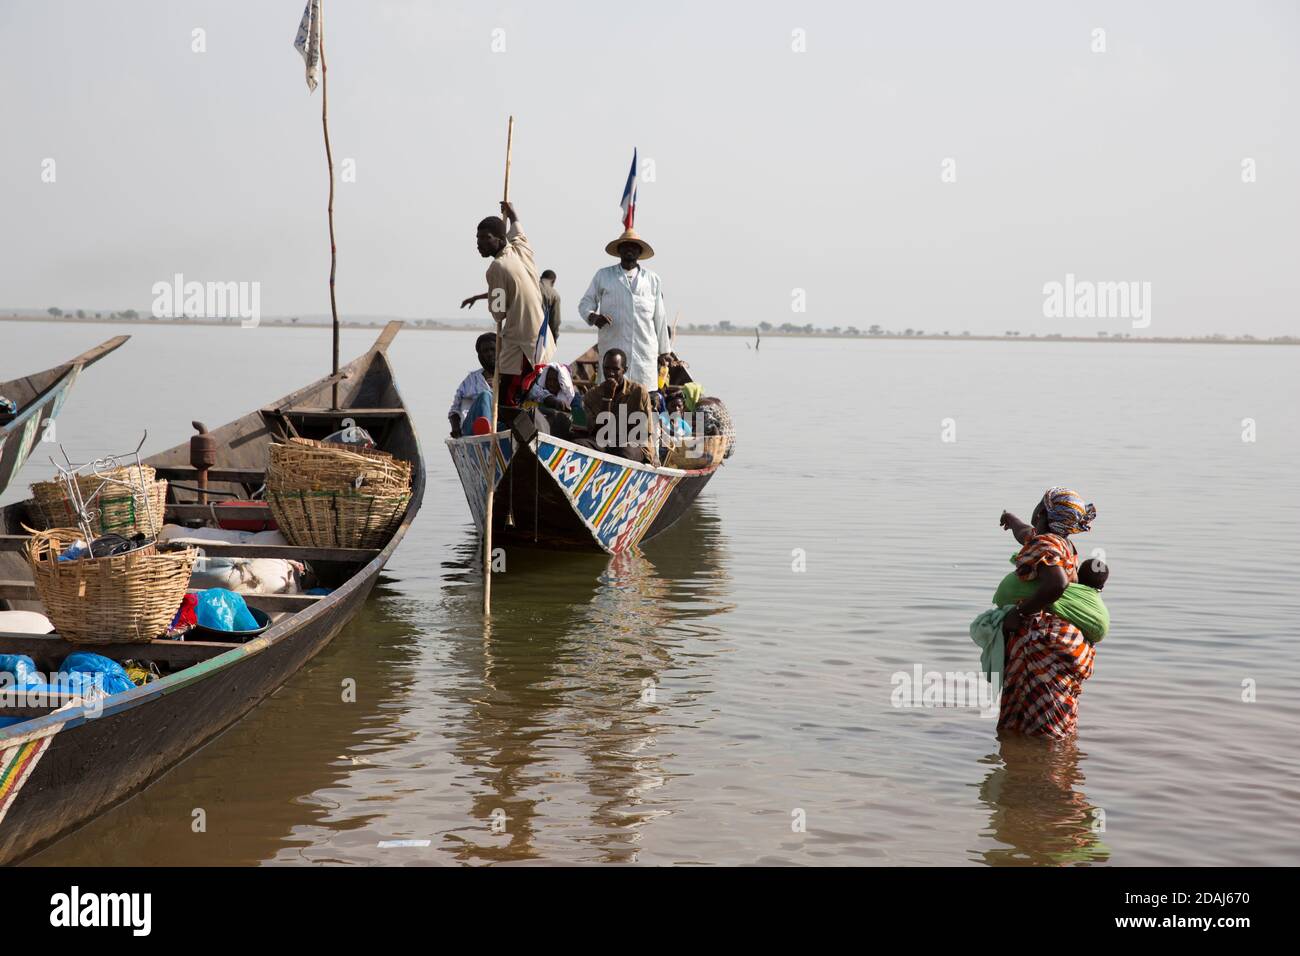 Selingue, Mali, 25th April 2015; Cariere village on the dam lake is a fishing village. Today the boats are carrying people to other villages on the lake such as Sogodogala for market day in Selingue town.  The journey costs 750 CFA per person for a round trip. Stock Photo